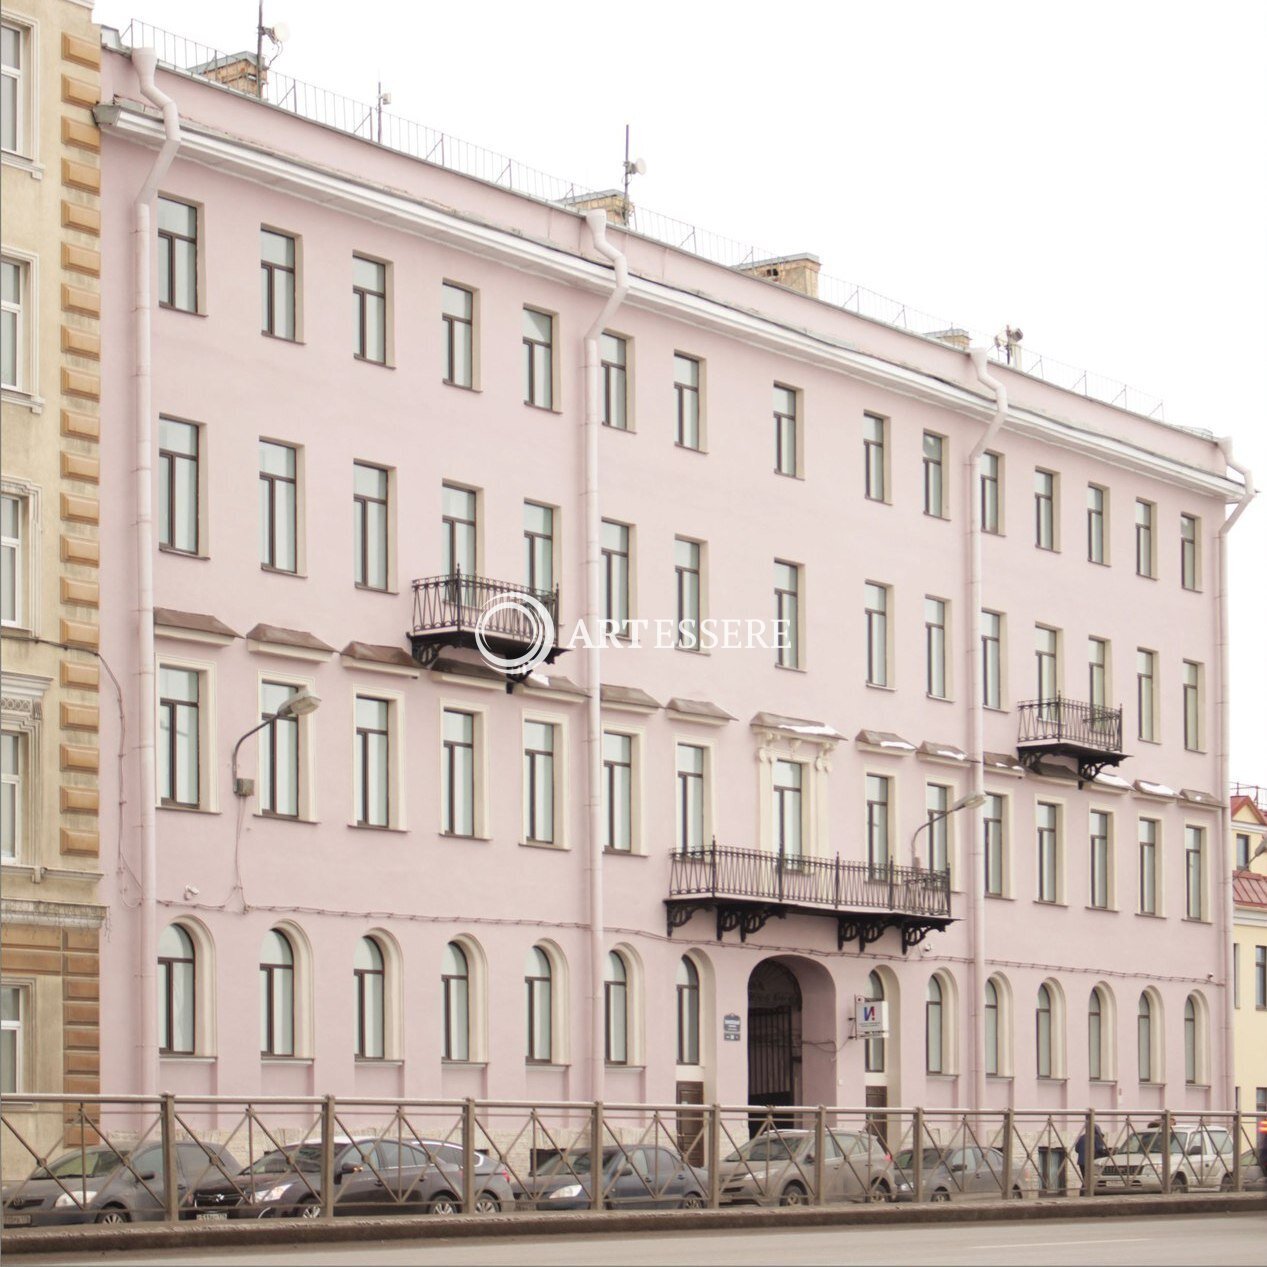 The St. Petersburg Museum of the History of Professional Education